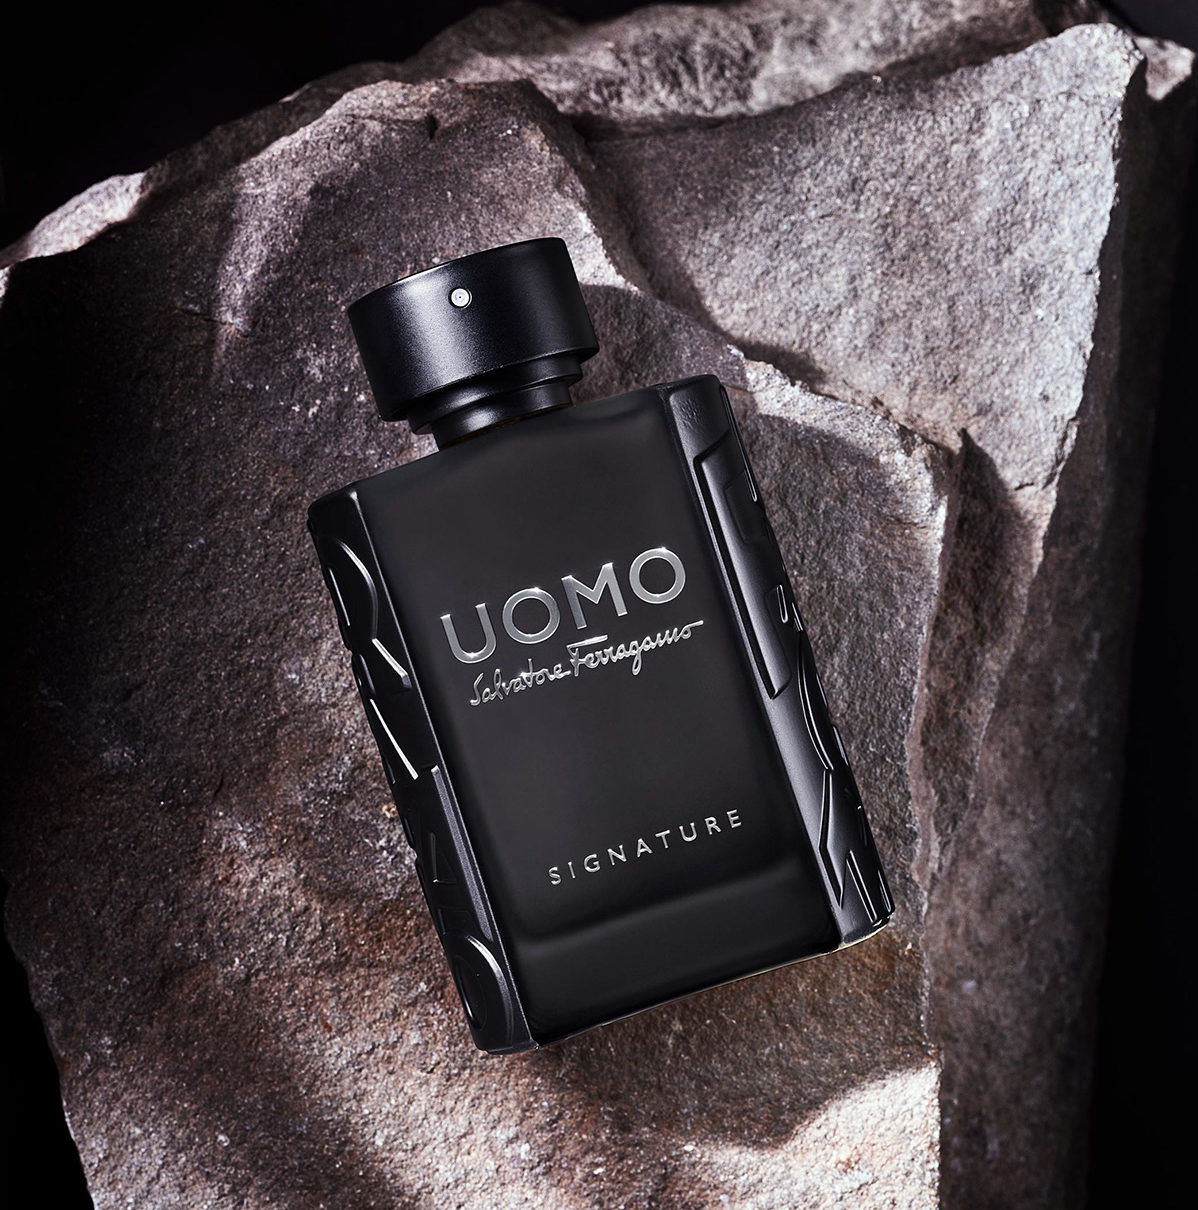 Hitting the right notes: The 7 best perfumes for men in autumn-winter 2020